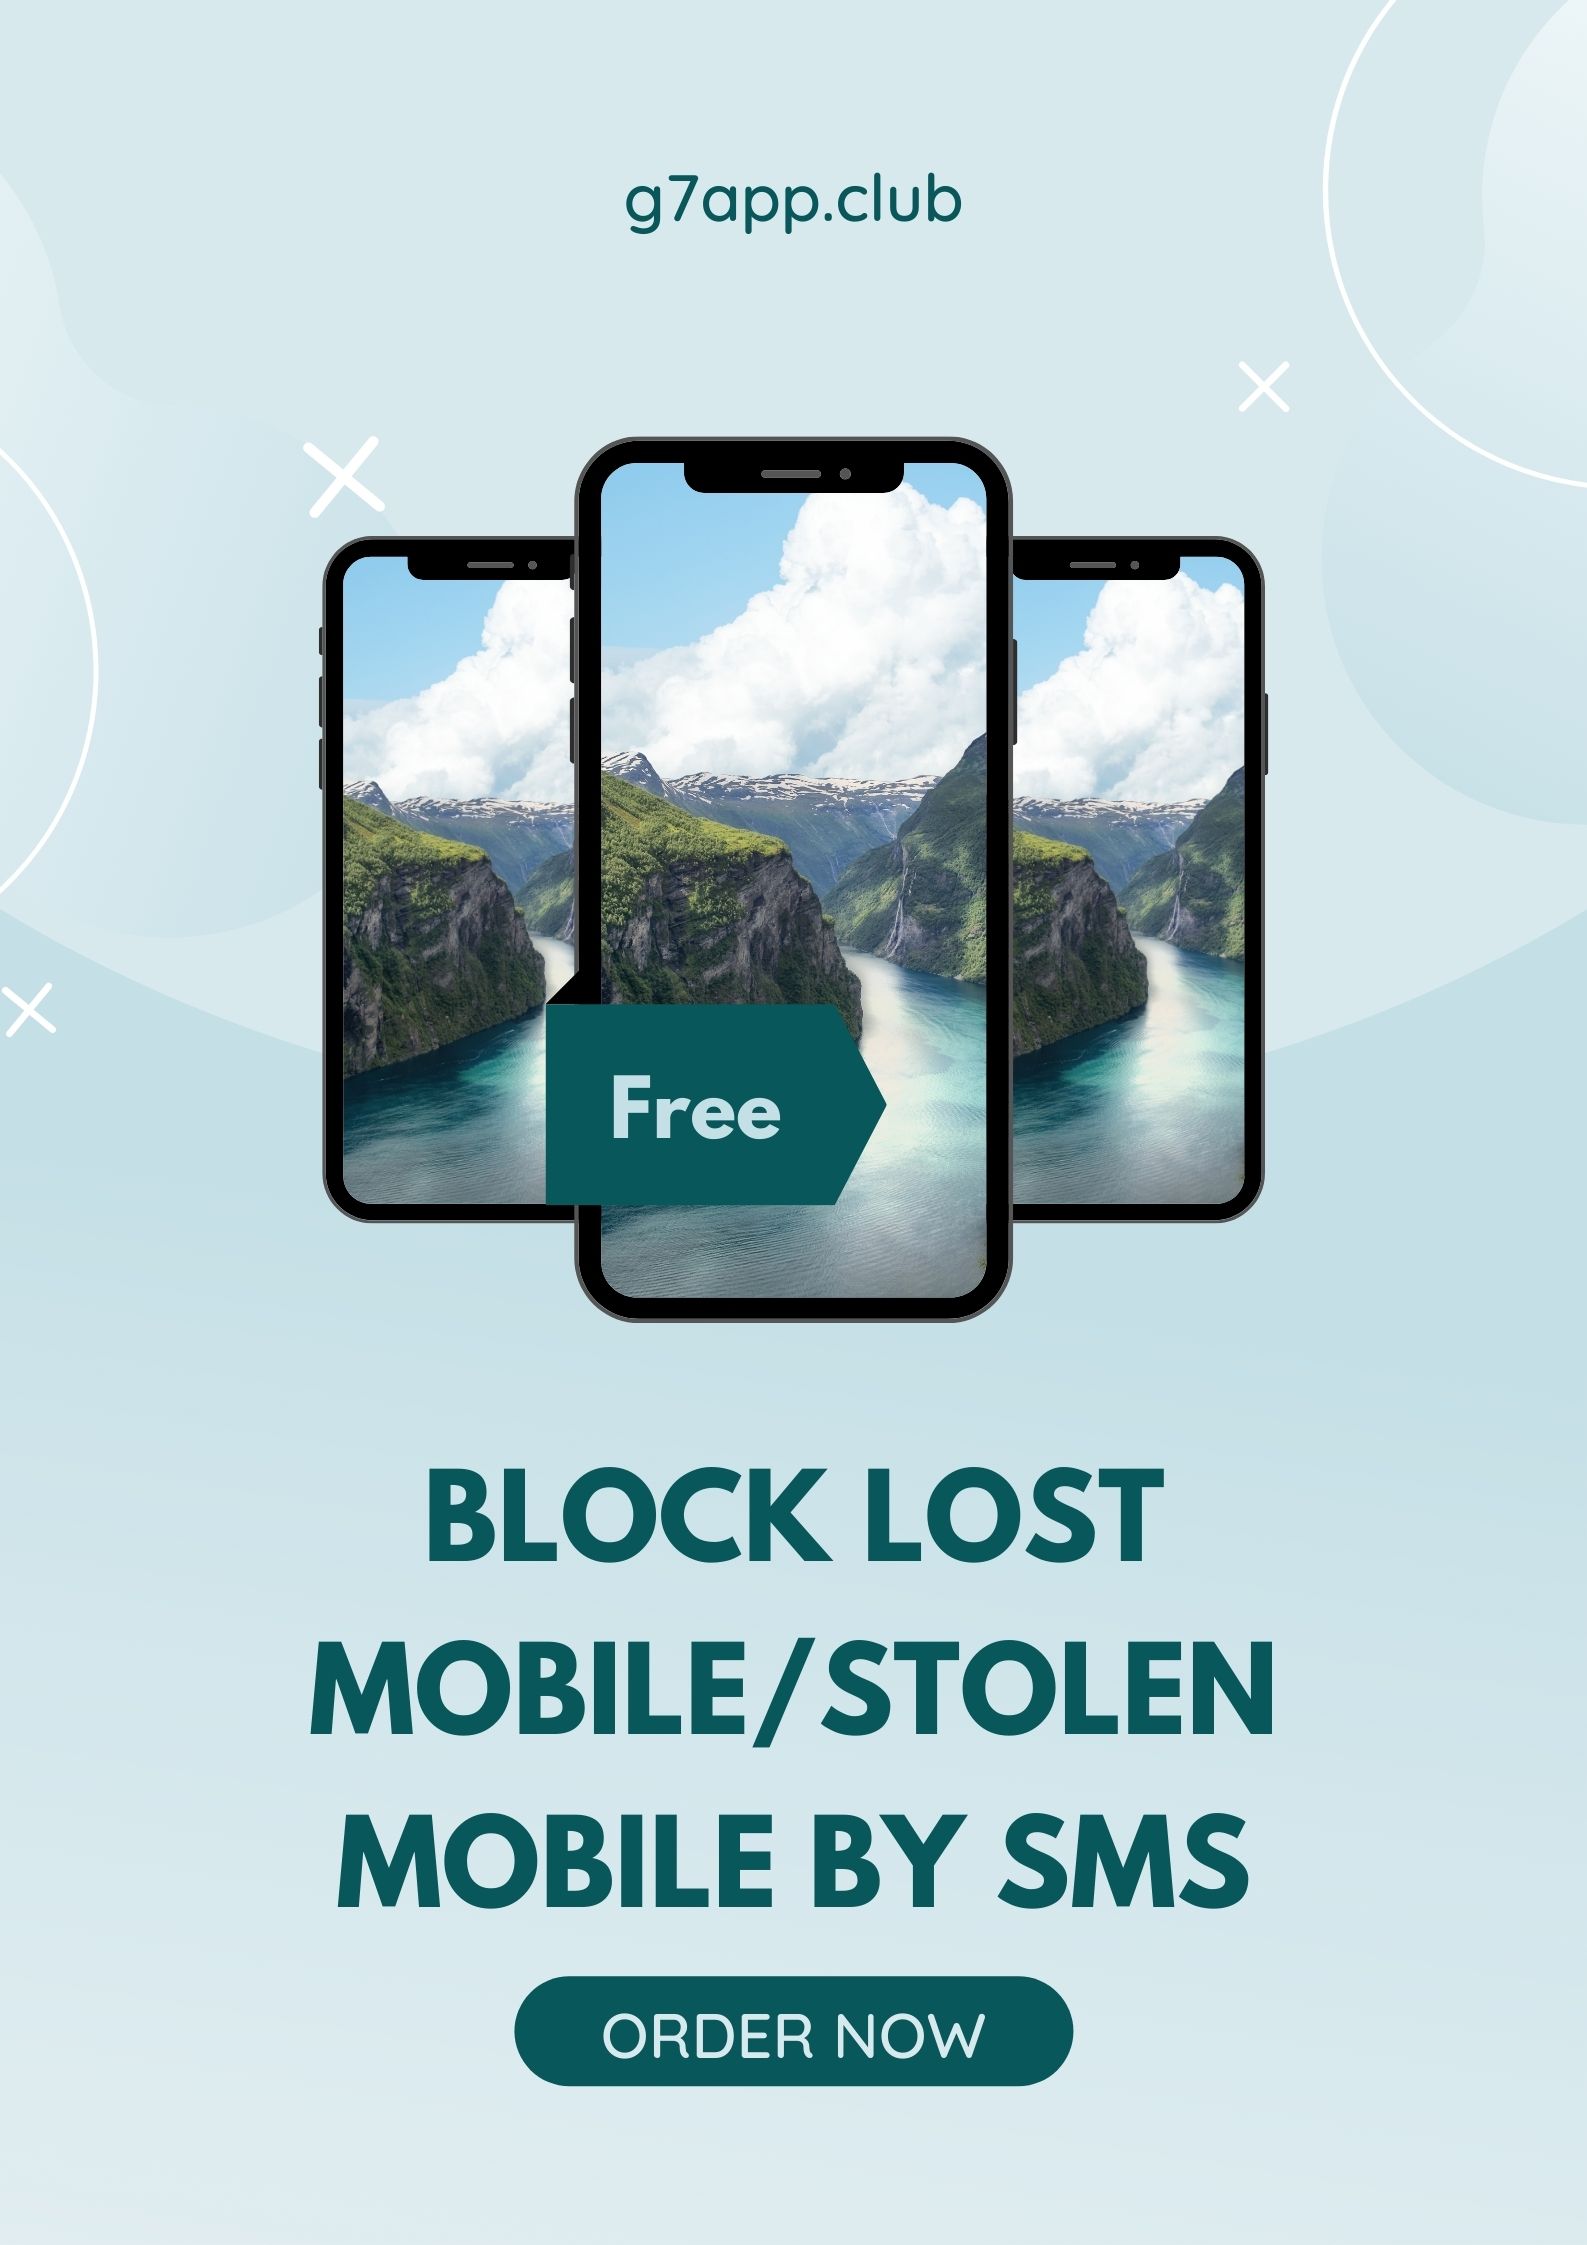 How to block lost mobile/stolen mobile by SMS